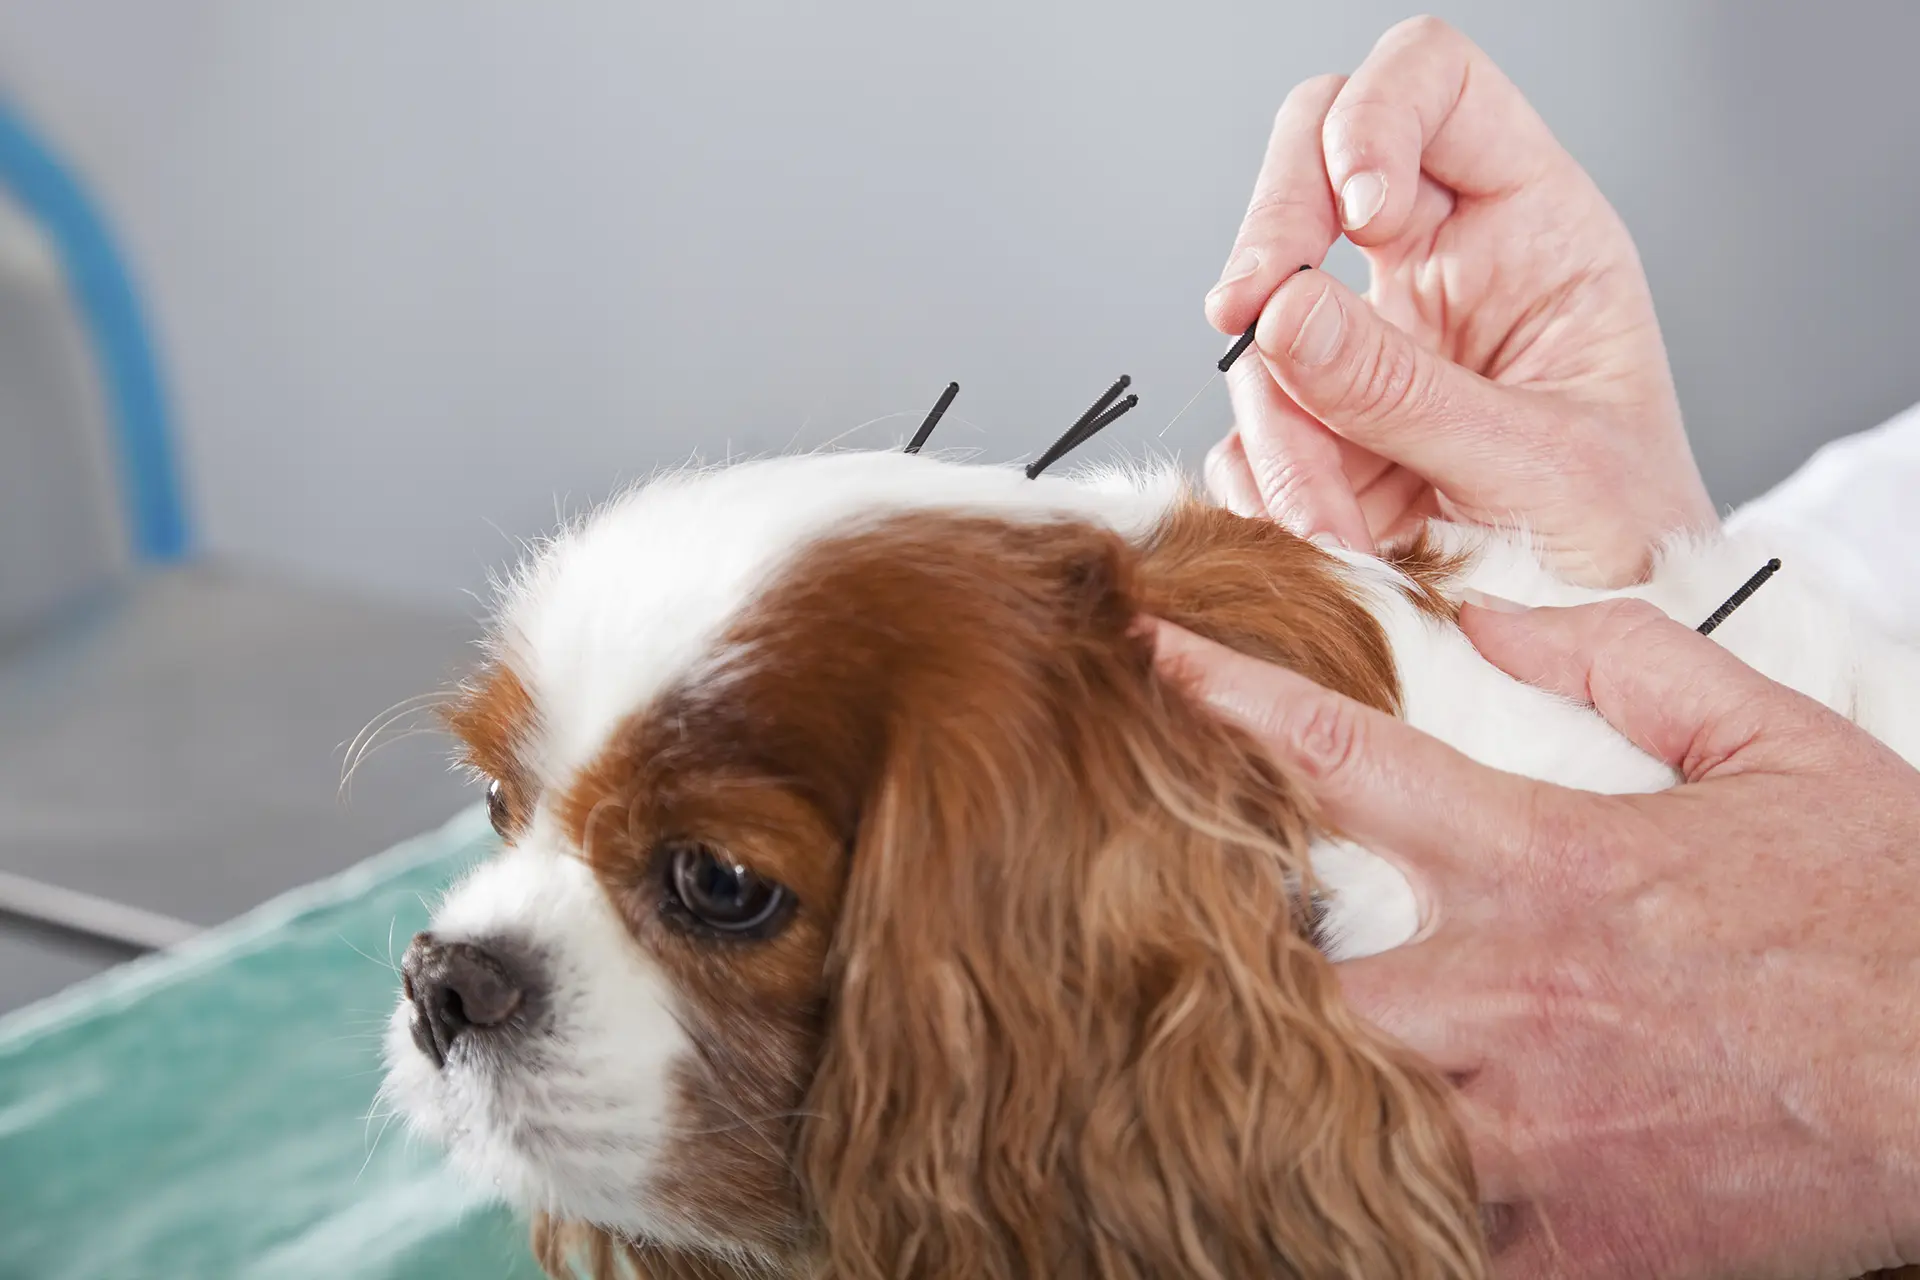 We are pleased to announce the addition of acupuncture treatments as part of our multi-modal approach to pet pain management.